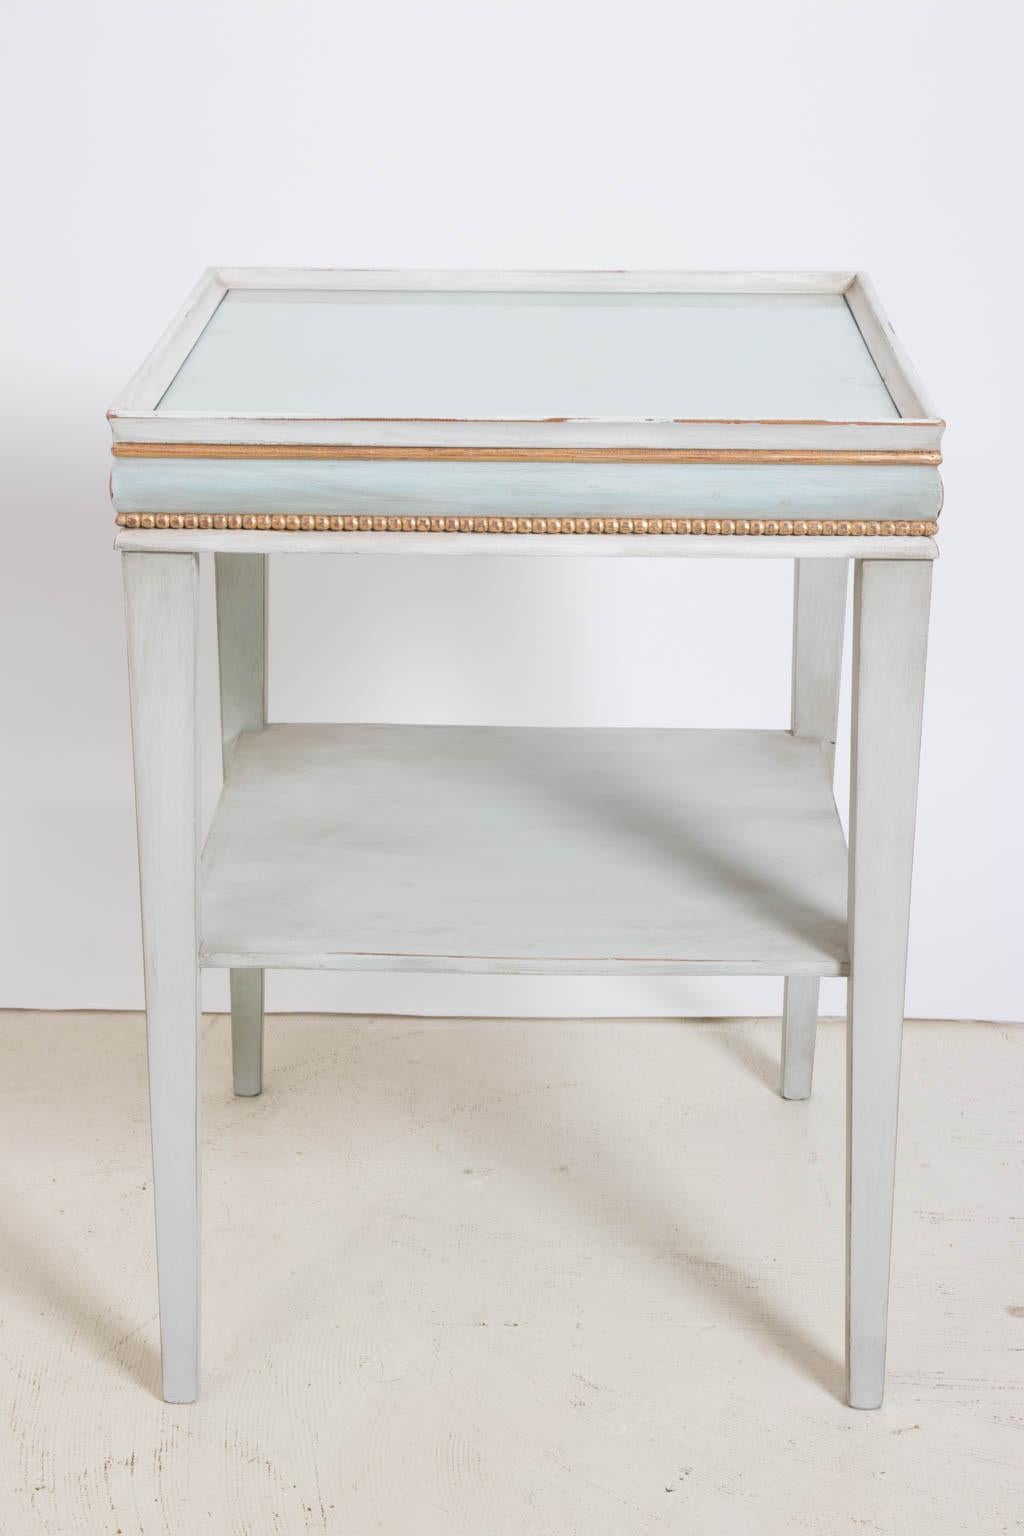 Painted square side table in the Gustavian style with glass insert top and bottom shelf, circa 1950s. The piece features beaded giltwood trim along with decorative molding in subtle painted shades of blue. Please note of wear consistent with age